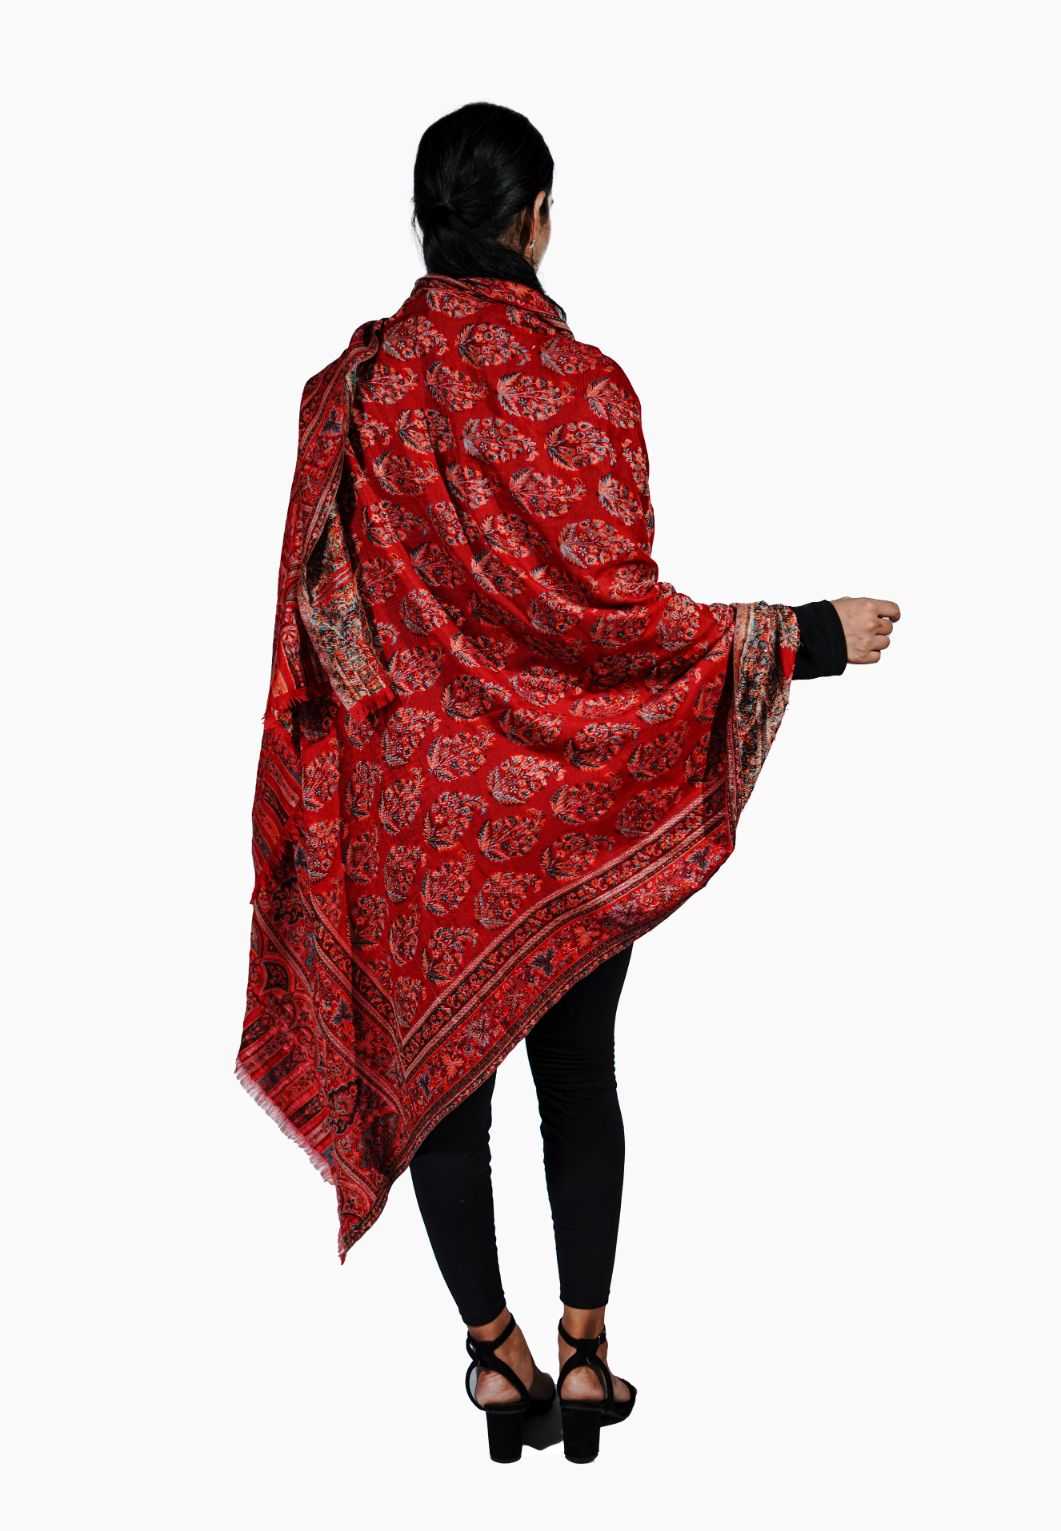 Women's Wool Blend Antique Shawl with Booti Design - Ruby Red